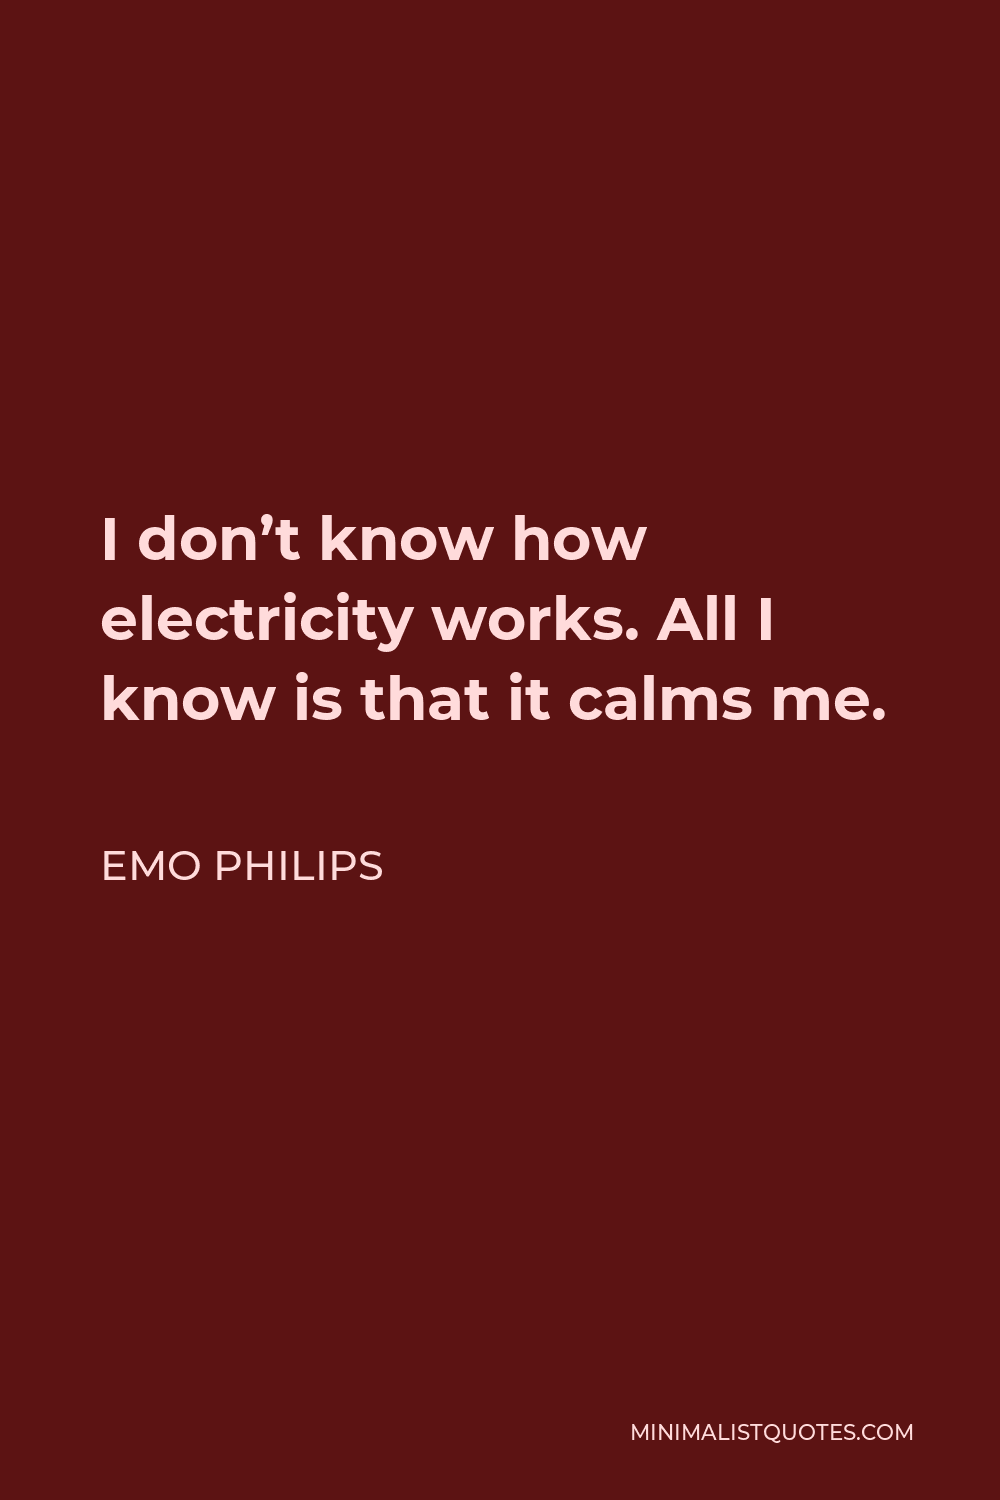 Emo Philips Quote - I don’t know how electricity works. All I know is that it calms me.